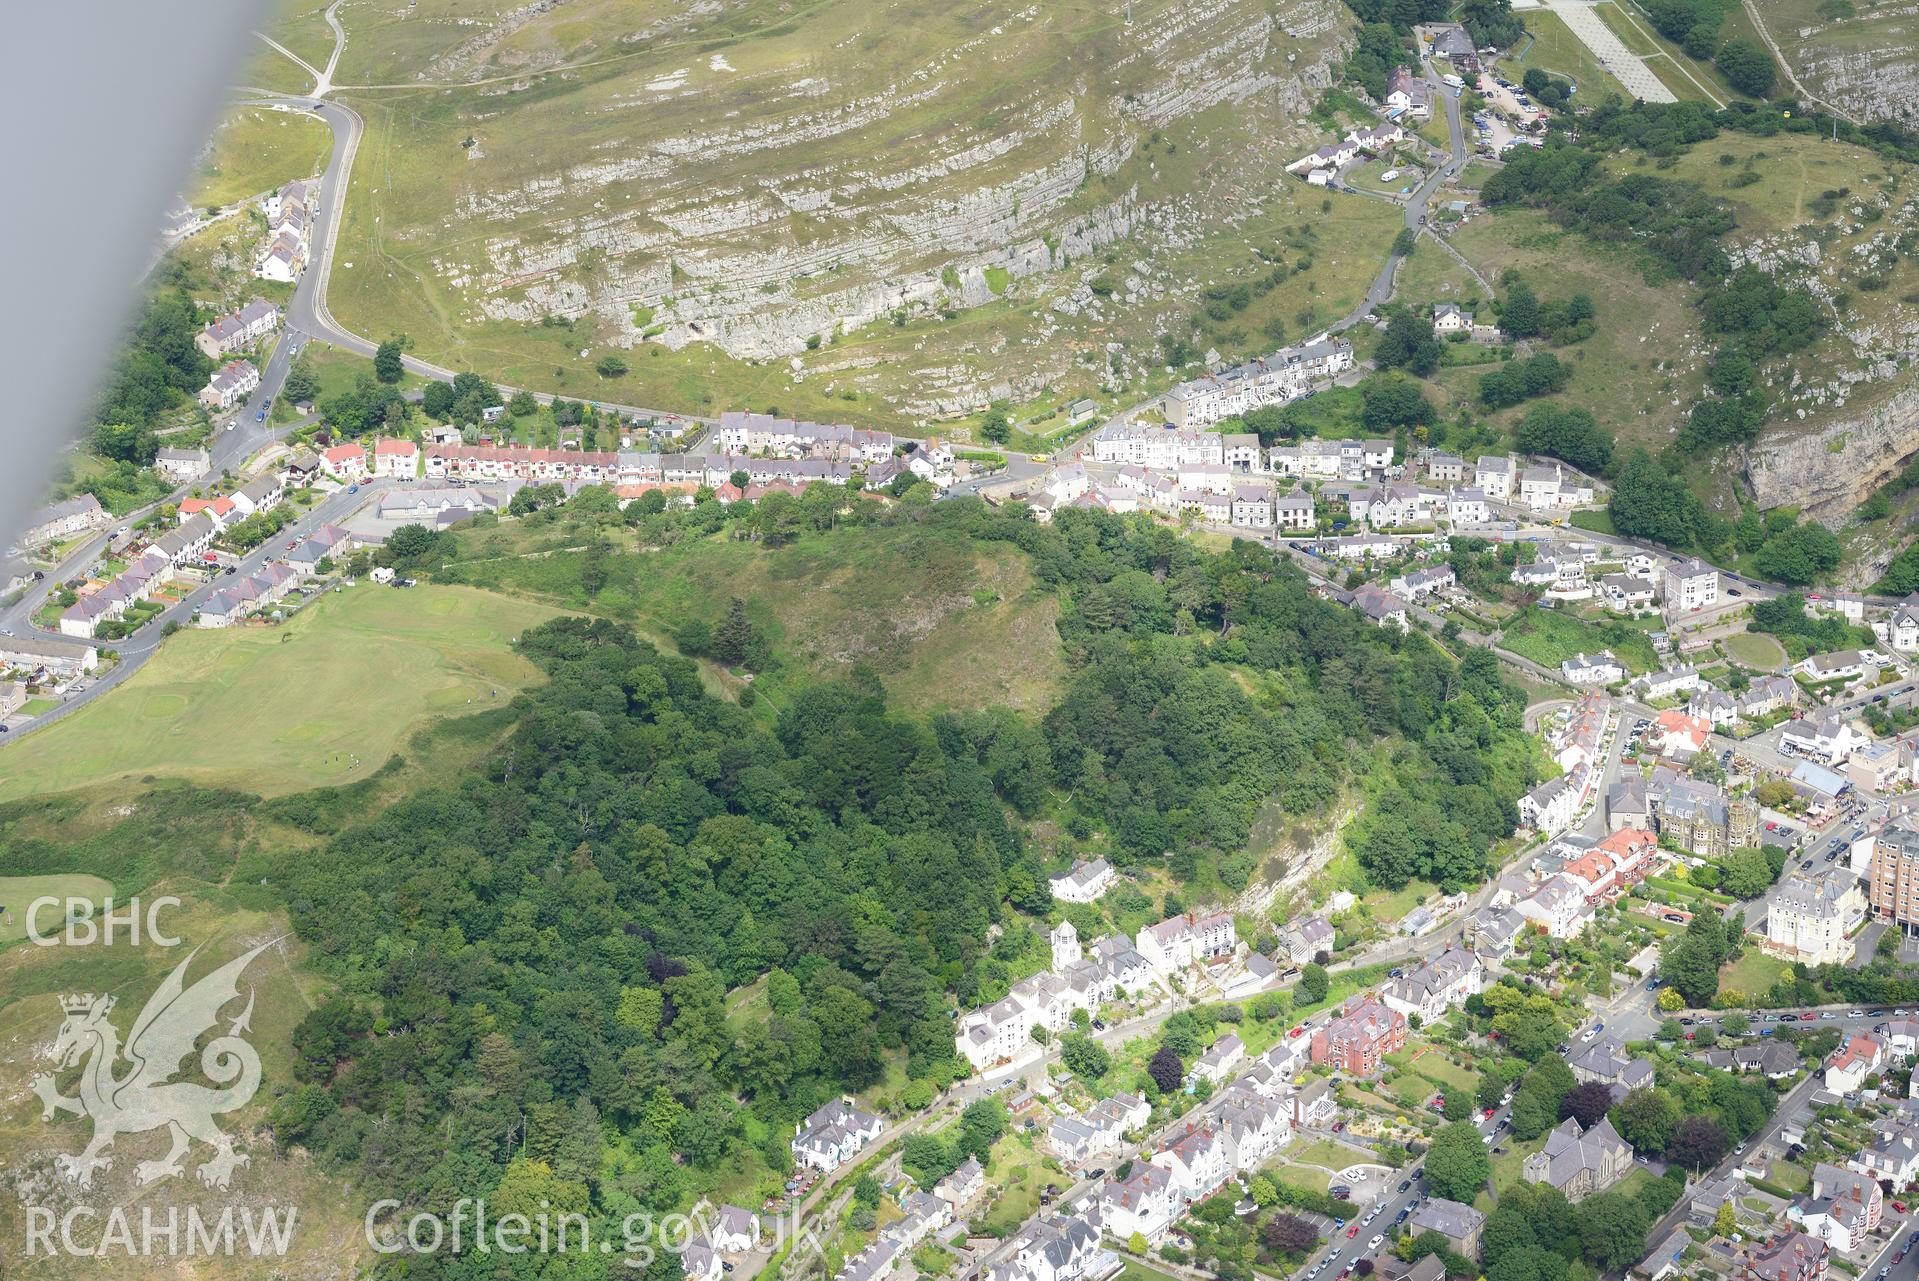 Bodlondeb Castle, St. George's Church and St. George's Church rectory. Llandudno. Oblique aerial photograph taken during the Royal Commission's programme of archaeological aerial reconnaissance by Toby Driver on 30th July 2015.